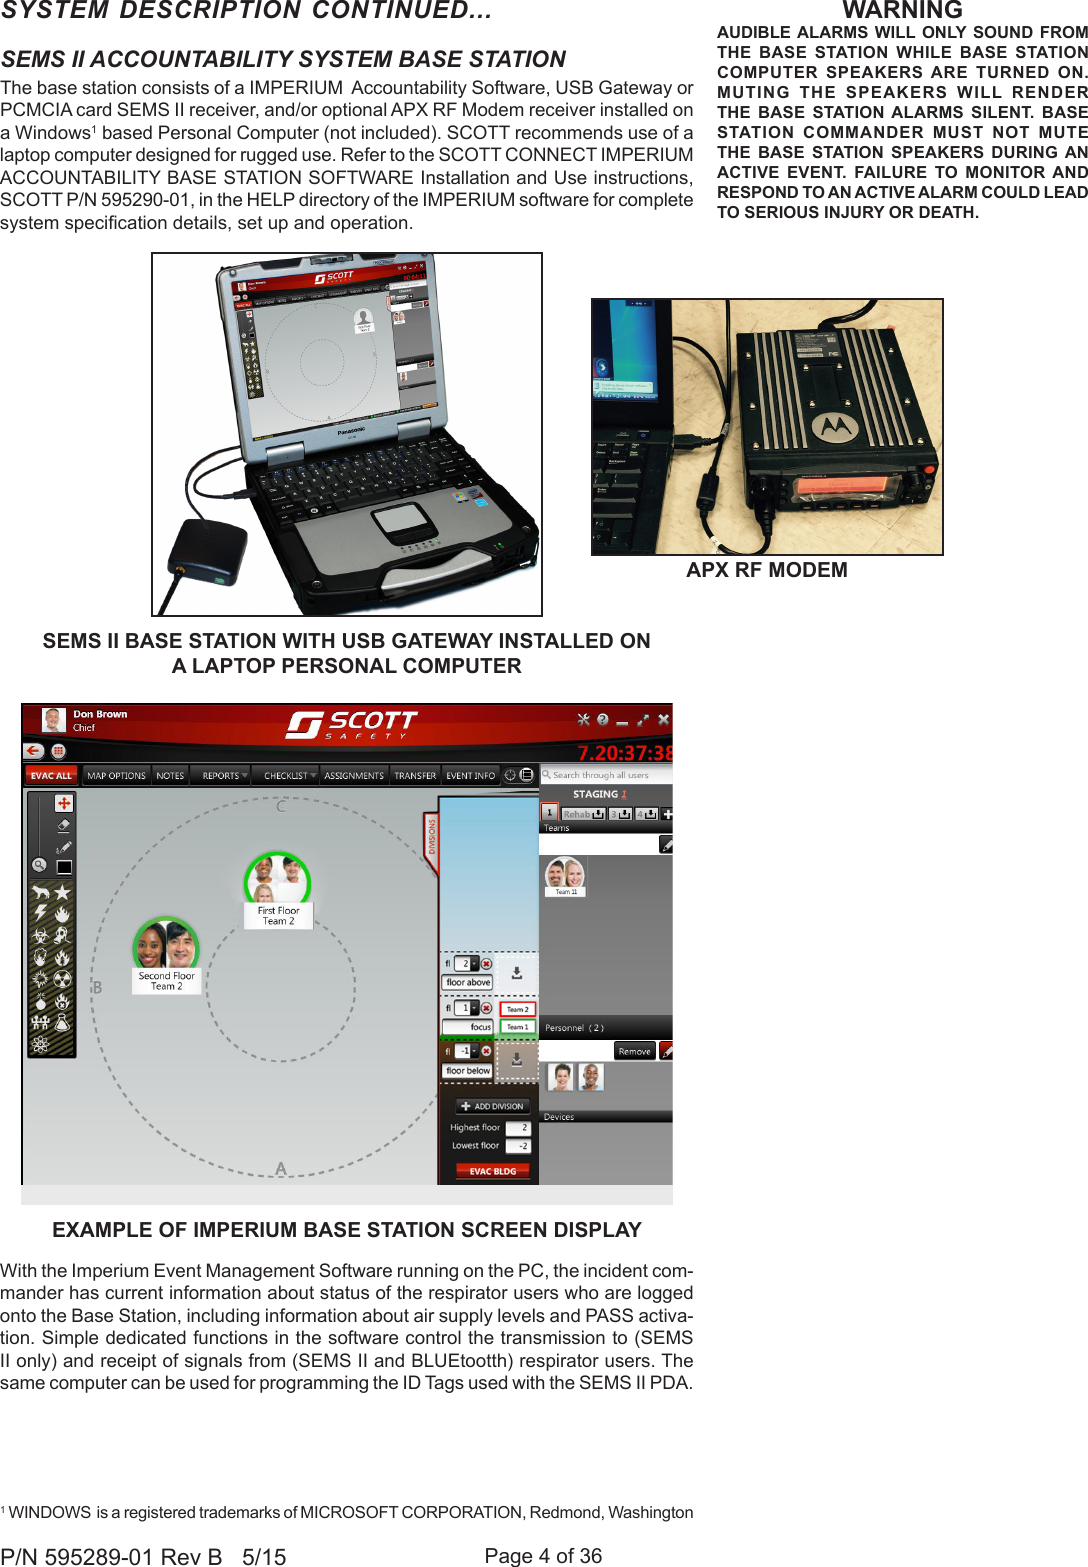 Page 4 of 36P/N 595289-01 Rev B   5/15SYSTEM DESCRIPTION CONTINUED...EXAMPLE OF IMPERIUM BASE STATION SCREEN DISPLAYSEMS II ACCOUNTABILITY SYSTEM BASE STATIONThe base station consists of a IMPERIUM  Accountability Software, USB Gateway or PCMCIA card SEMS II receiver, and/or optional APX RF Modem receiver installed on a Windows1 based Personal Computer (not included). SCOTT recommends use of a laptop computer designed for rugged use. Refer to the SCOTT CONNECT IMPERIUM ACCOUNTABILITY BASE STATION SOFTWARE Installation and Use instructions, SCOTT P/N 595290-01, in the HELP directory of the IMPERIUM software for complete system specication details, set up and operation. With the Imperium Event Management Software running on the PC, the incident com-mander has current information about status of the respirator users who are logged onto the Base Station, including information about air supply levels and PASS activa-tion. Simple dedicated functions in the software control the transmission to (SEMS II only) and receipt of signals from (SEMS II and BLUEtootth) respirator users. The same computer can be used for programming the ID Tags used with the SEMS II PDA. 1 WINDOWS  is a registered trademarks of MICROSOFT CORPORATION, Redmond, WashingtonSEMS II BASE STATION WITH USB GATEWAY INSTALLED ON  A LAPTOP PERSONAL COMPUTERWARNINGAUDIBLE ALARMS WILL ONLY SOUND FROM THE BASE STATION WHILE BASE STATION COMPUTER SPEAKERS ARE TURNED ON. MUTING THE SPEAKERS WILL RENDER THE BASE STATION ALARMS SILENT. BASE STATION COMMANDER MUST NOT MUTE THE BASE STATION SPEAKERS DURING AN ACTIVE EVENT. FAILURE TO MONITOR AND RESPOND TO AN ACTIVE ALARM COULD LEAD TO SERIOUS INJURY OR DEATH.APX RF MODEM